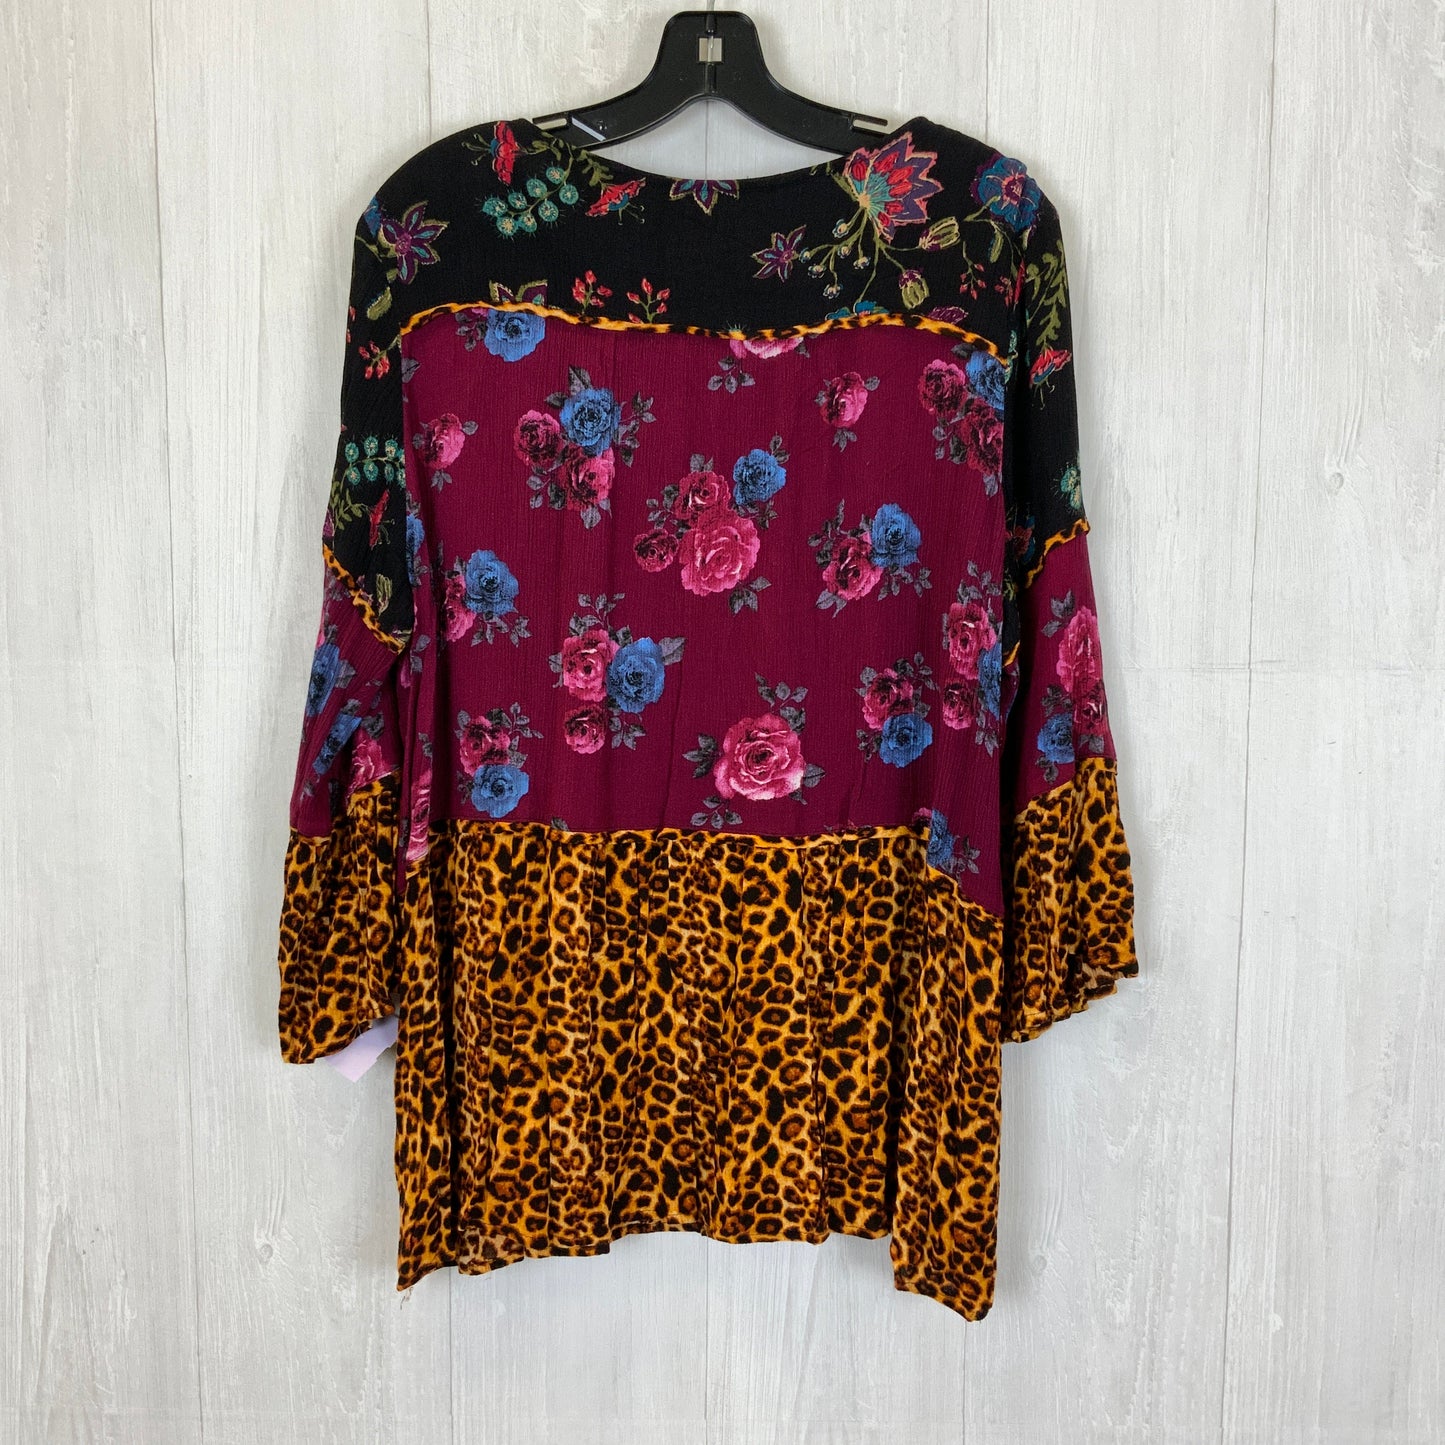 Multi-colored Top Long Sleeve Calessa, Size Xl